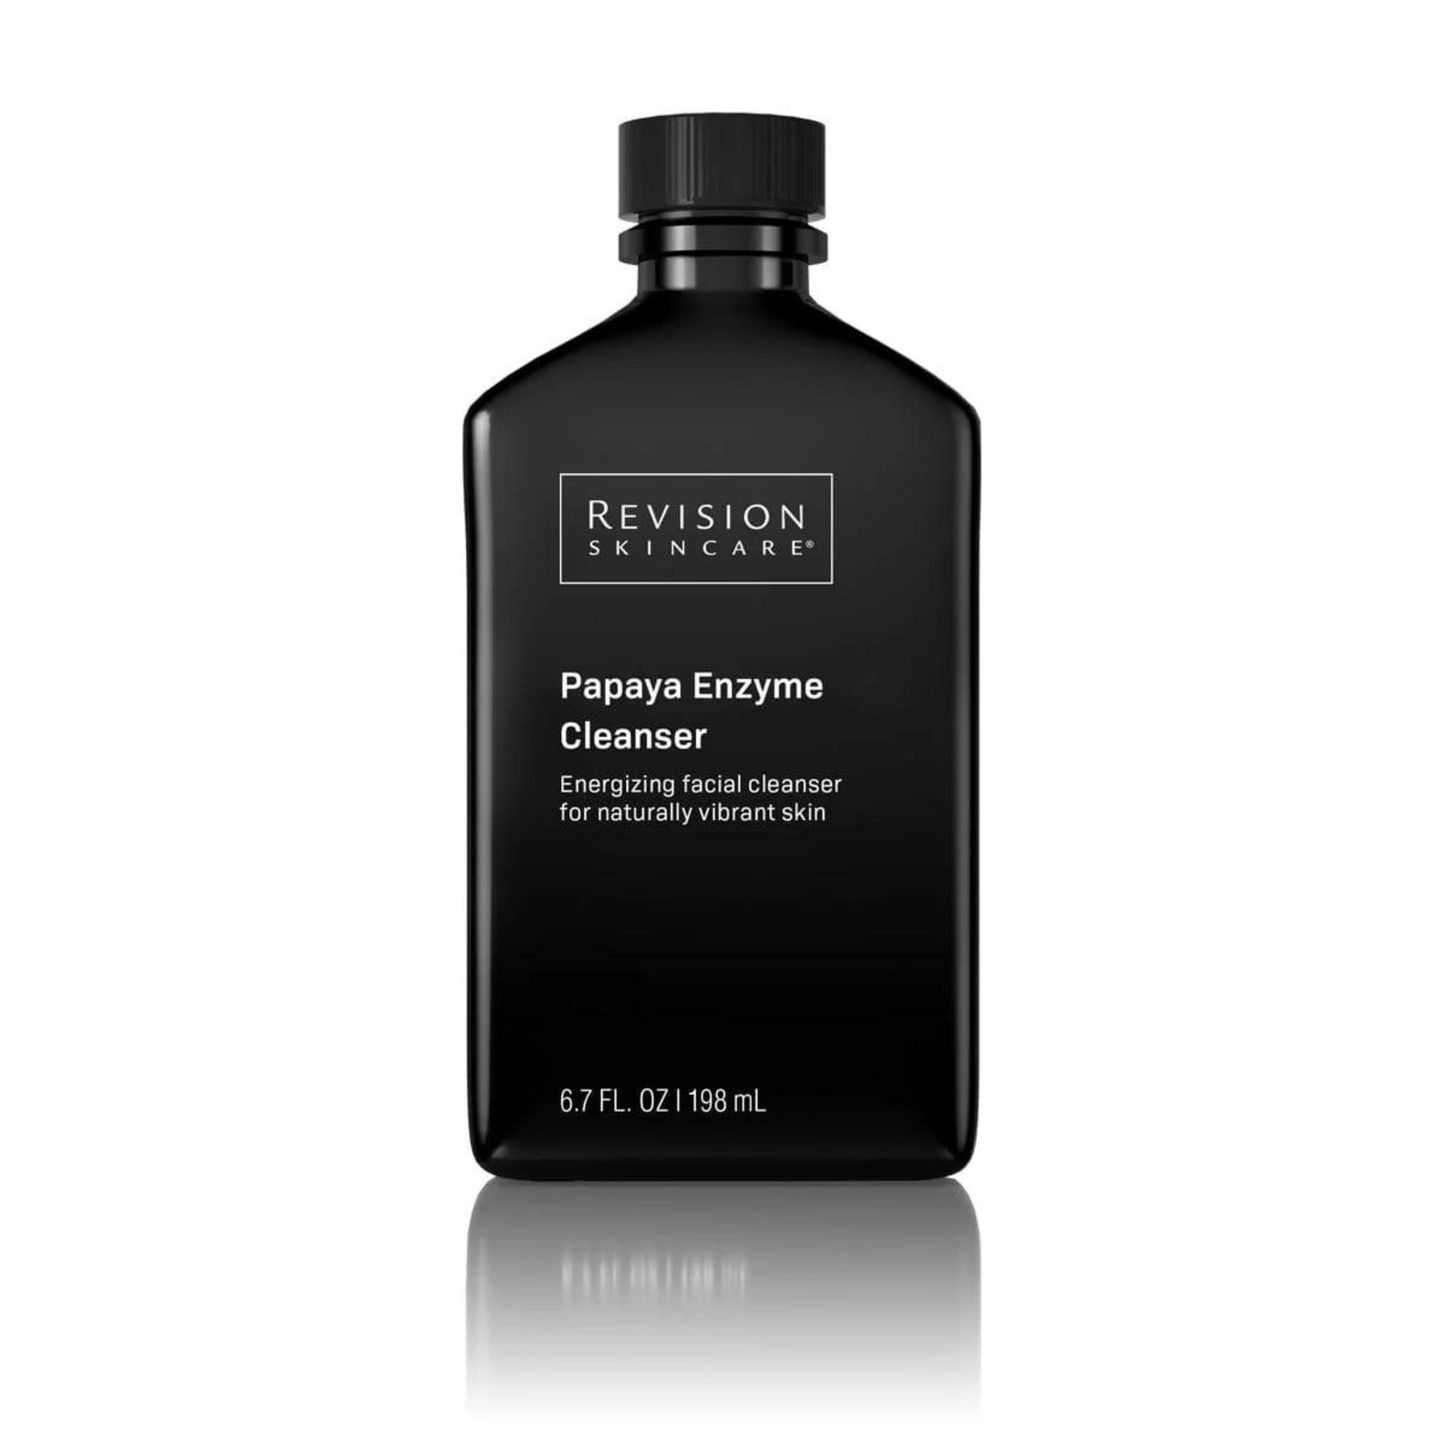 Papaya Enzyme Cleanser | Revision Skincare